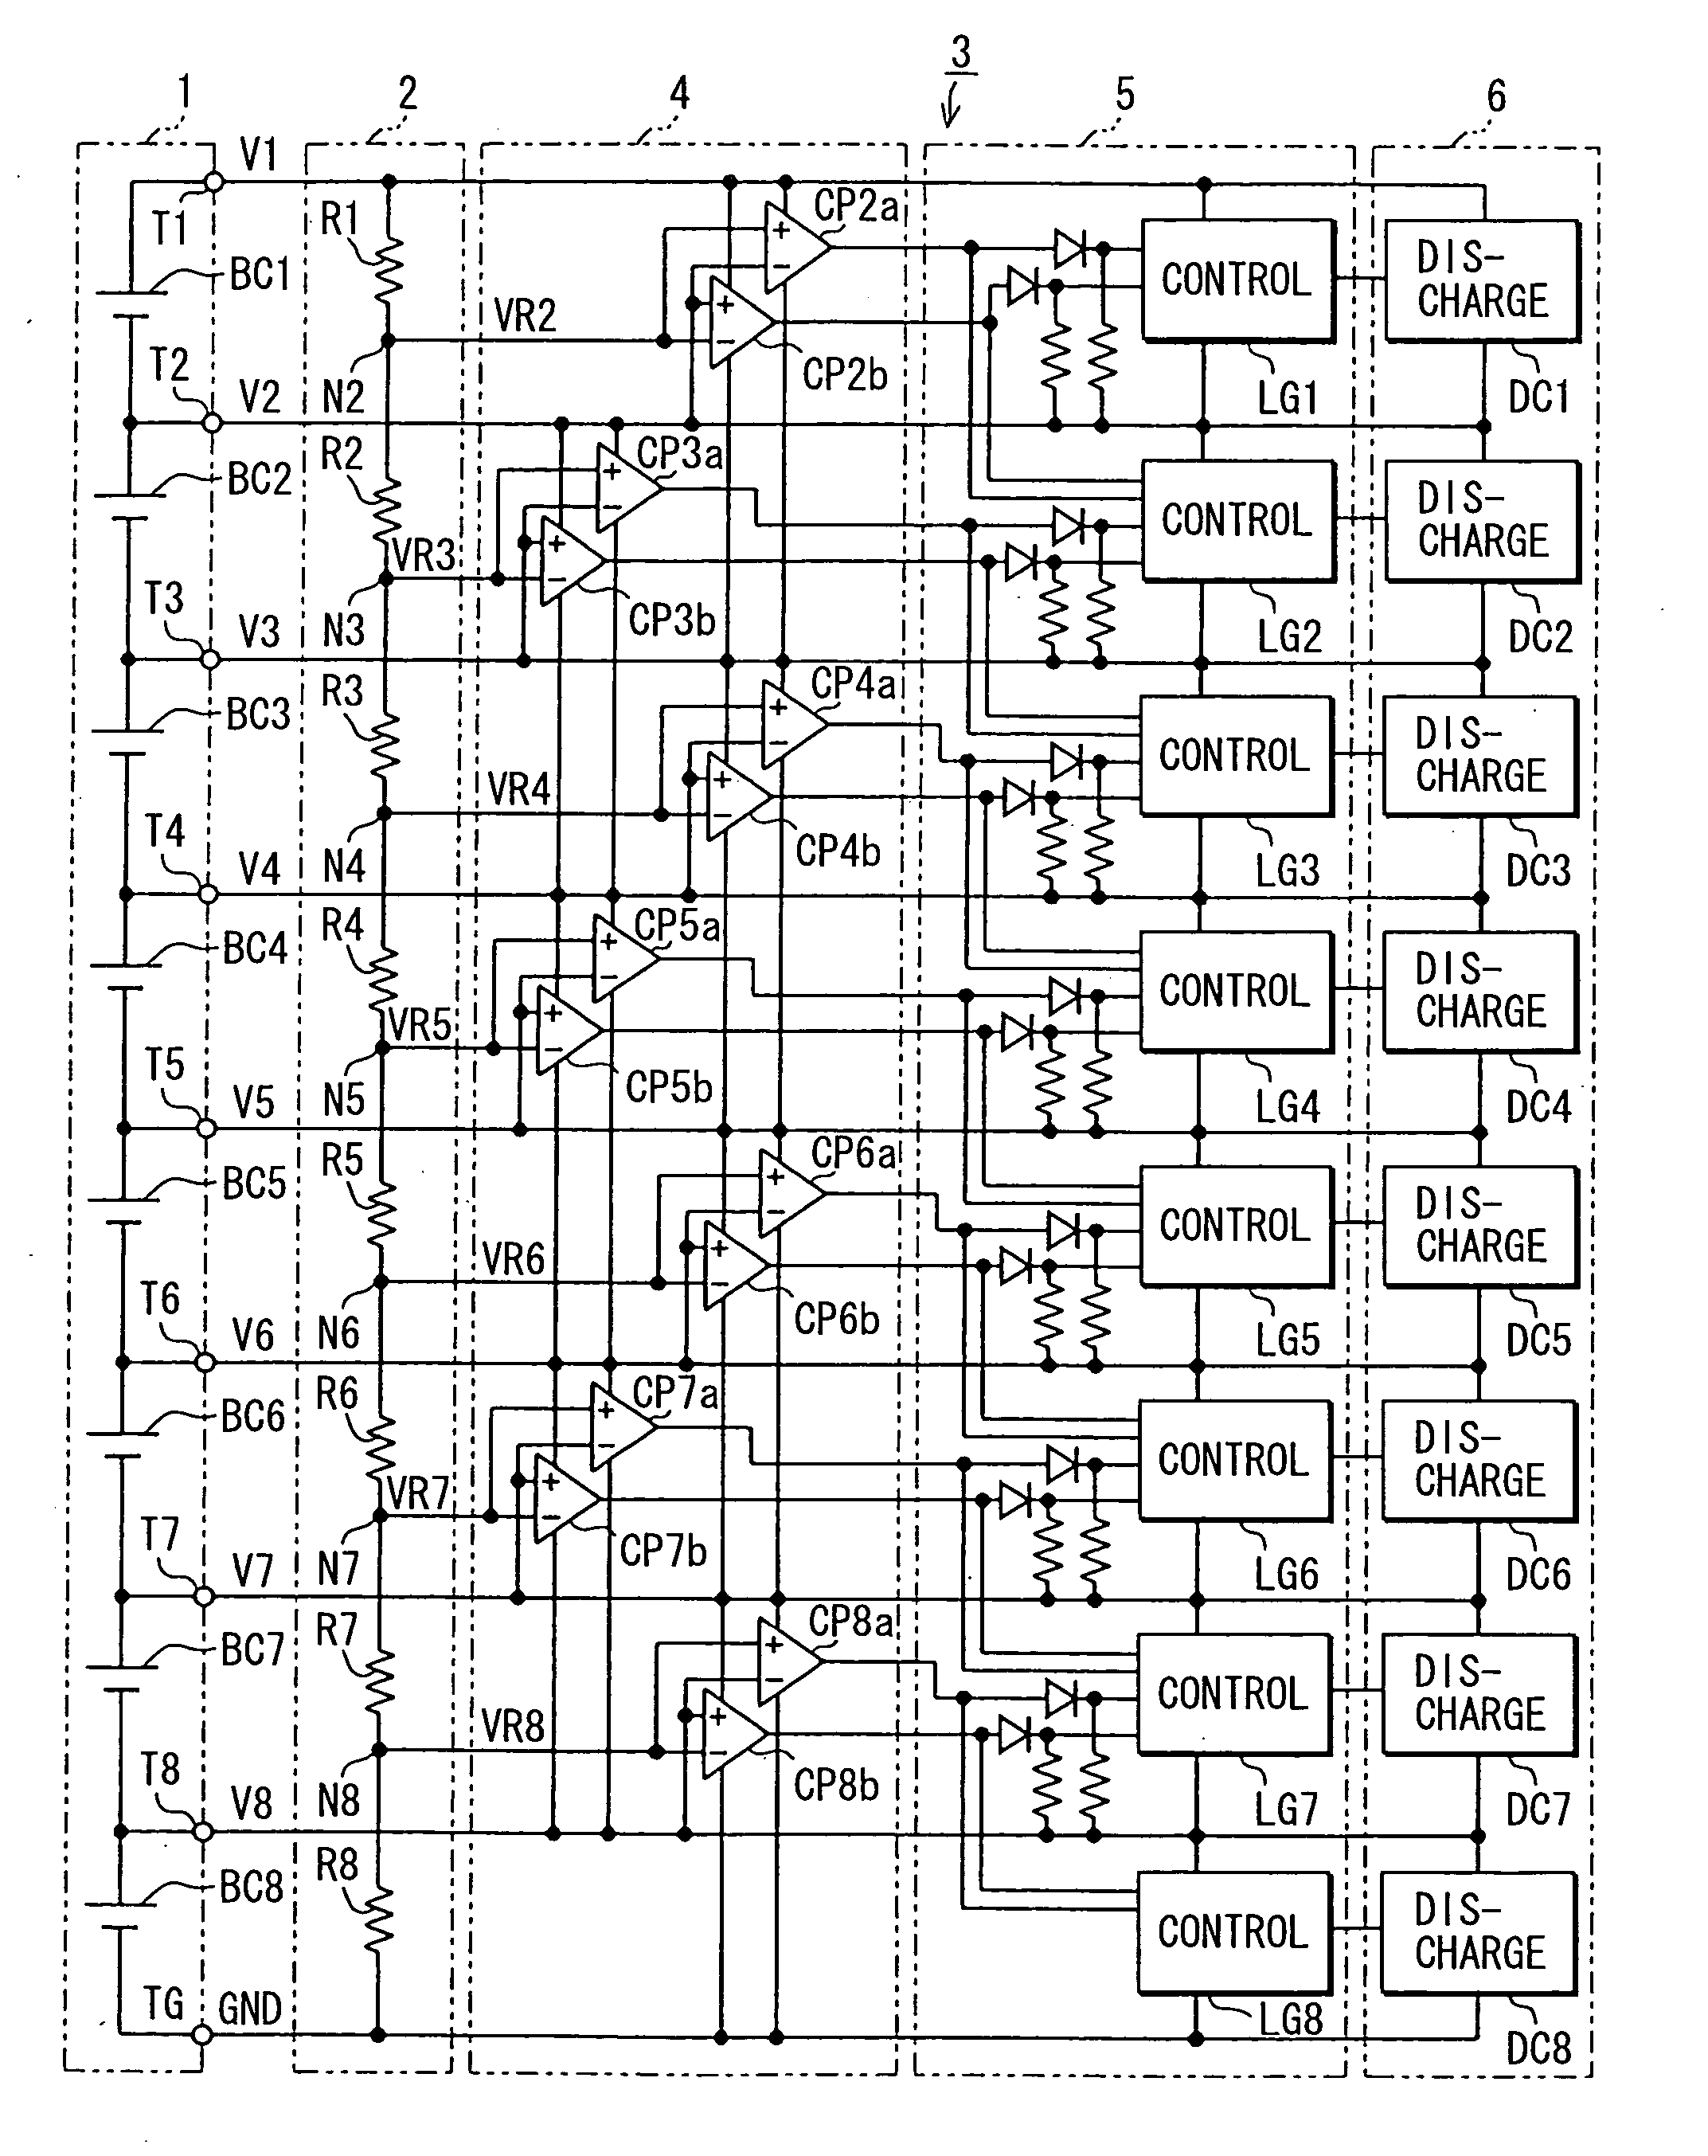 Cell voltage equalization apparatus for combined battery pack